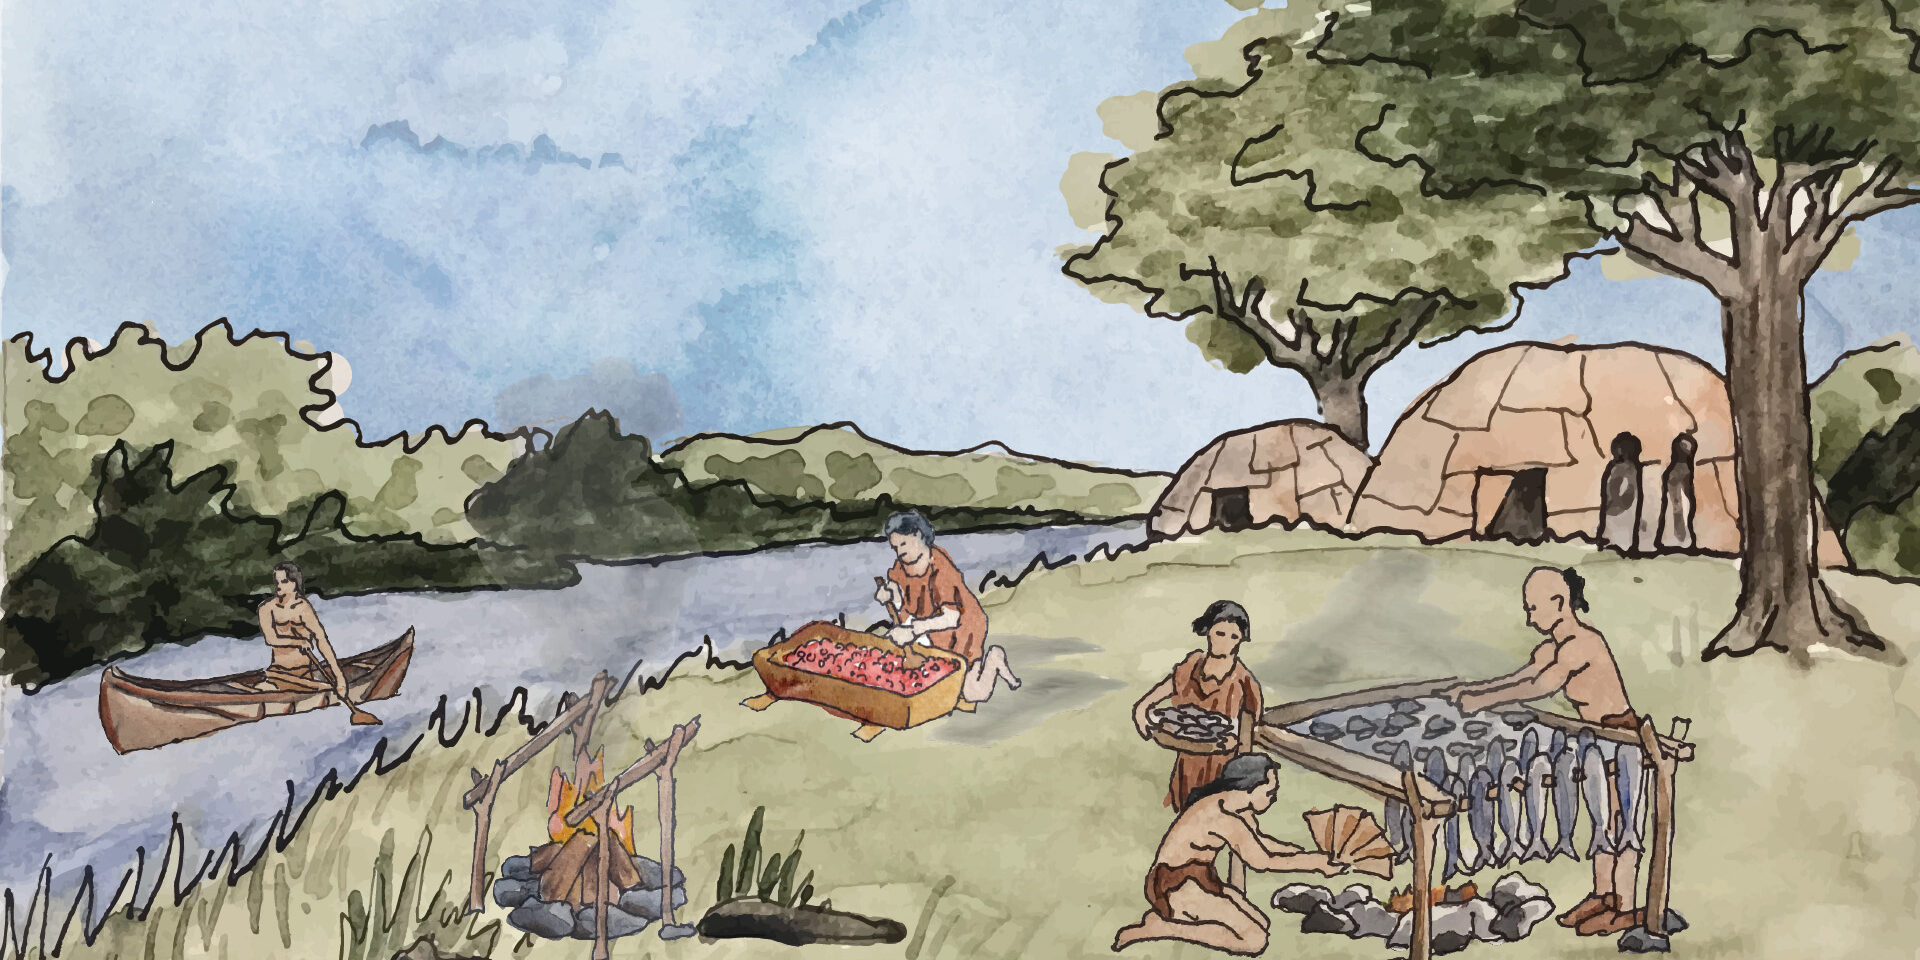 Illustration of several native peoples on the banks of a river mashing berries, cooking fish over a fire, and canoeing down the river.